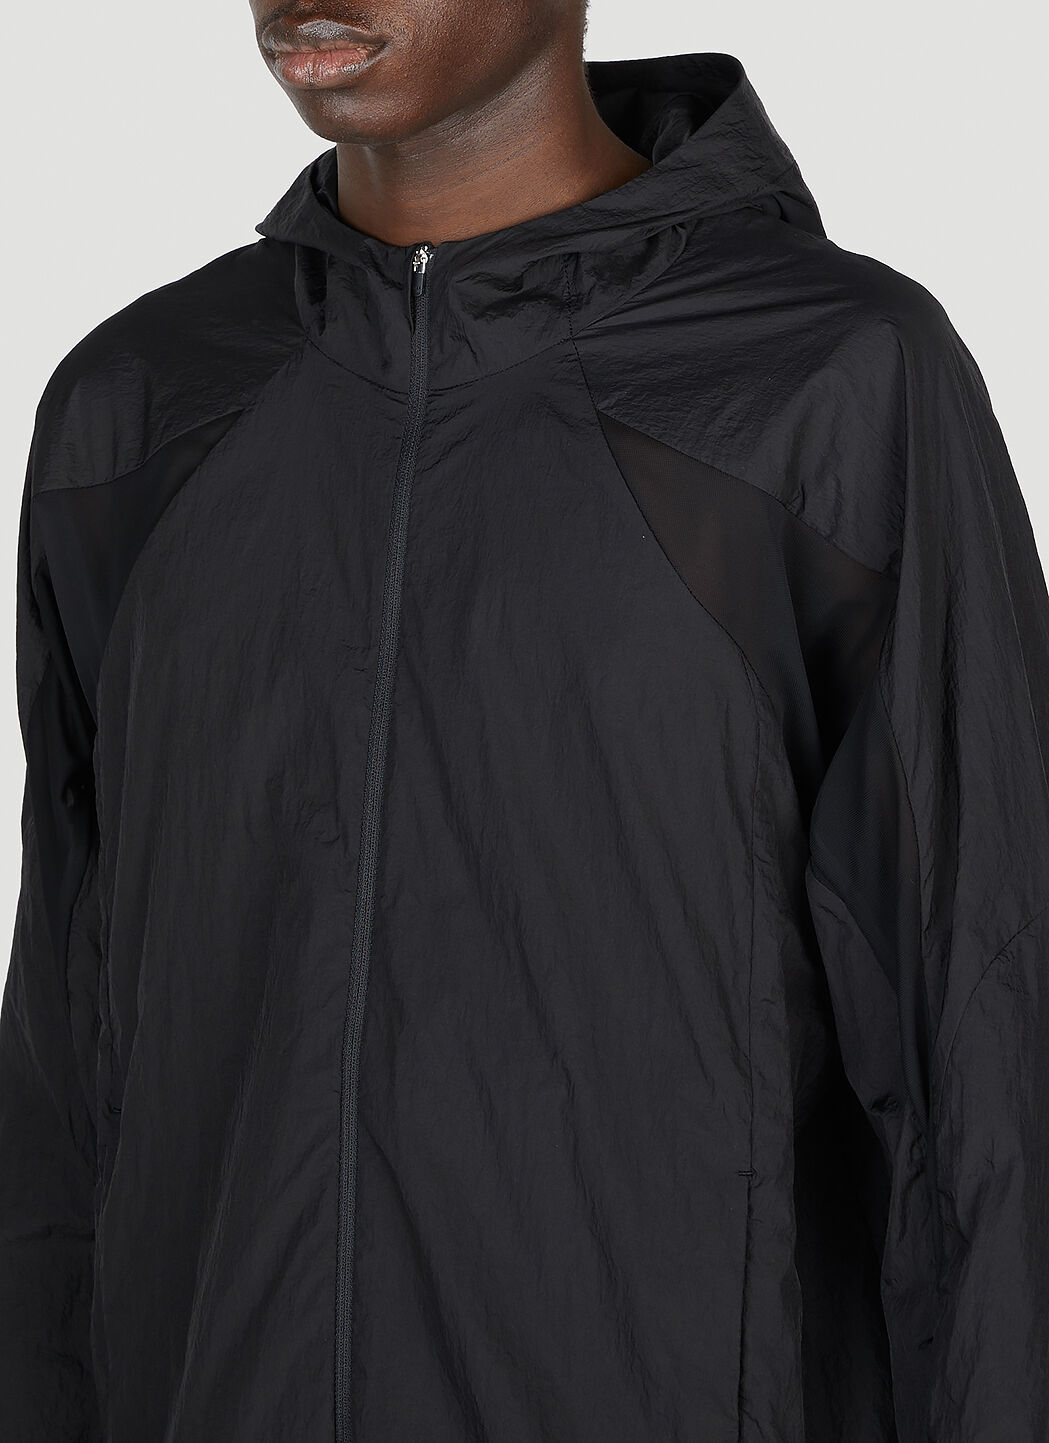 POST ARCHIVE FACTION (PAF) 5.0+ Technical Jacket in Black